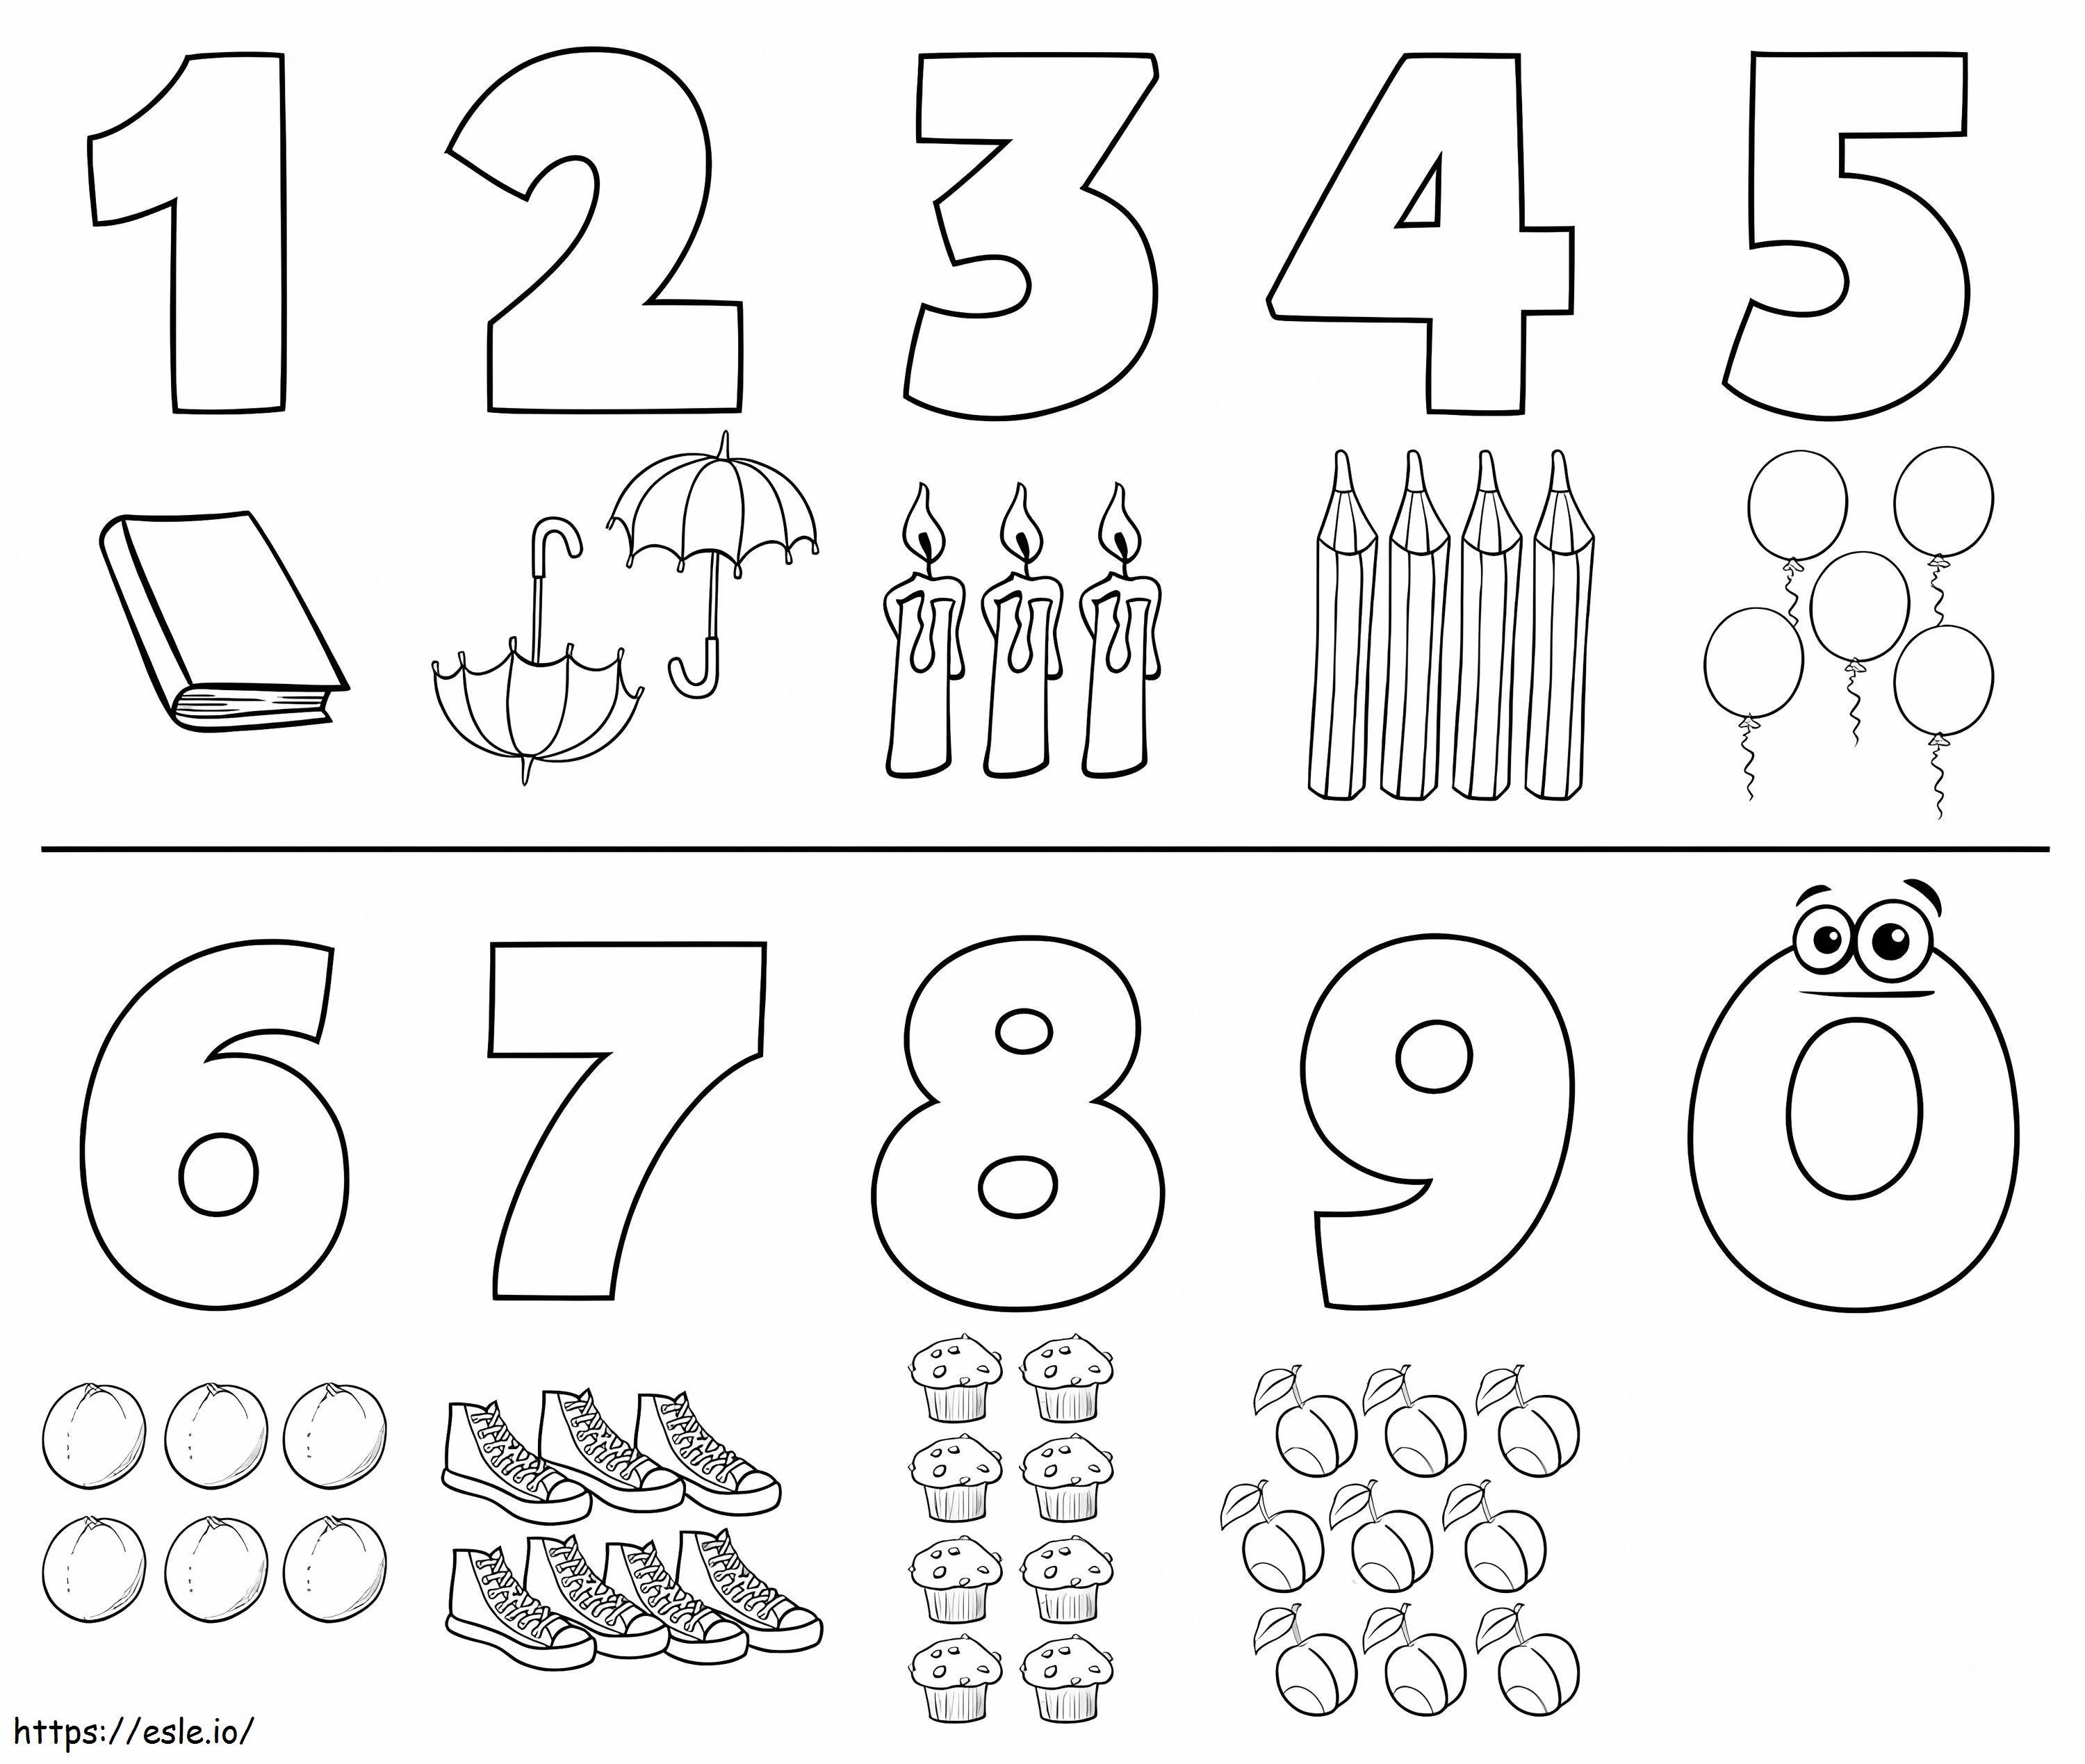 Images Of Numbers From 0 To 9 coloring page